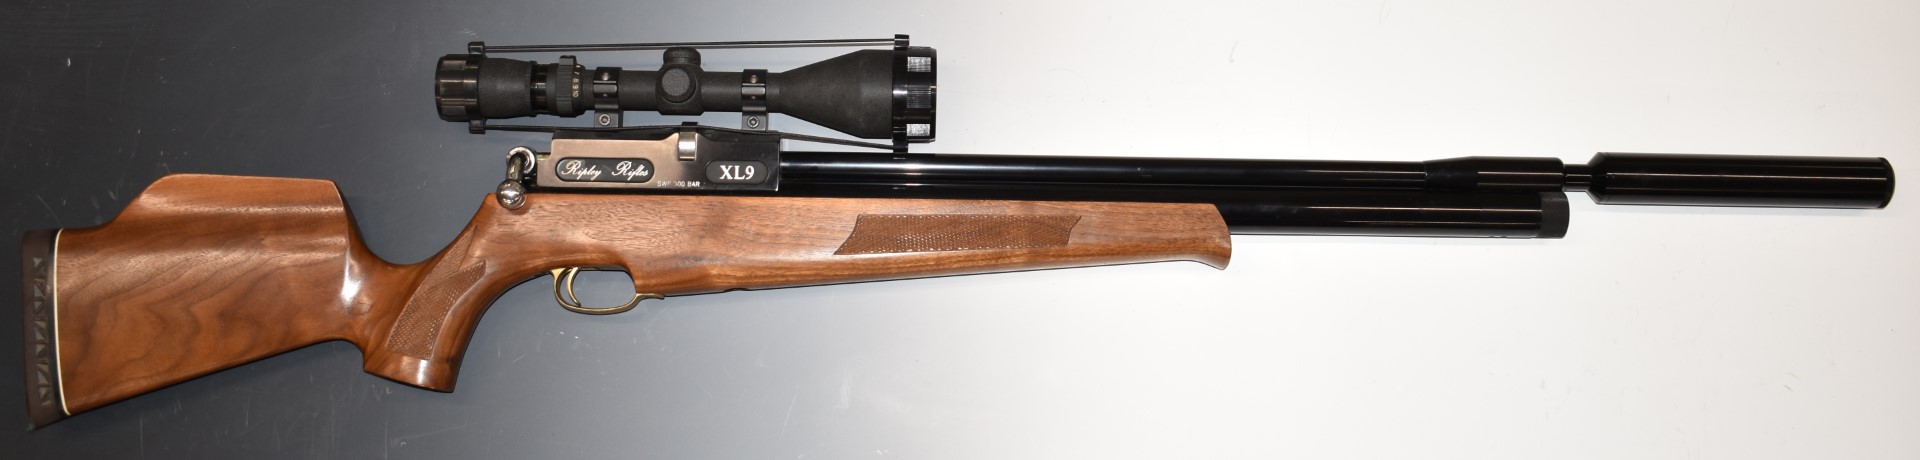 Ripley Rifles XL9 .22 PCP air rifle with nine shot magazine, chequered semi-pistol grip and - Image 2 of 10